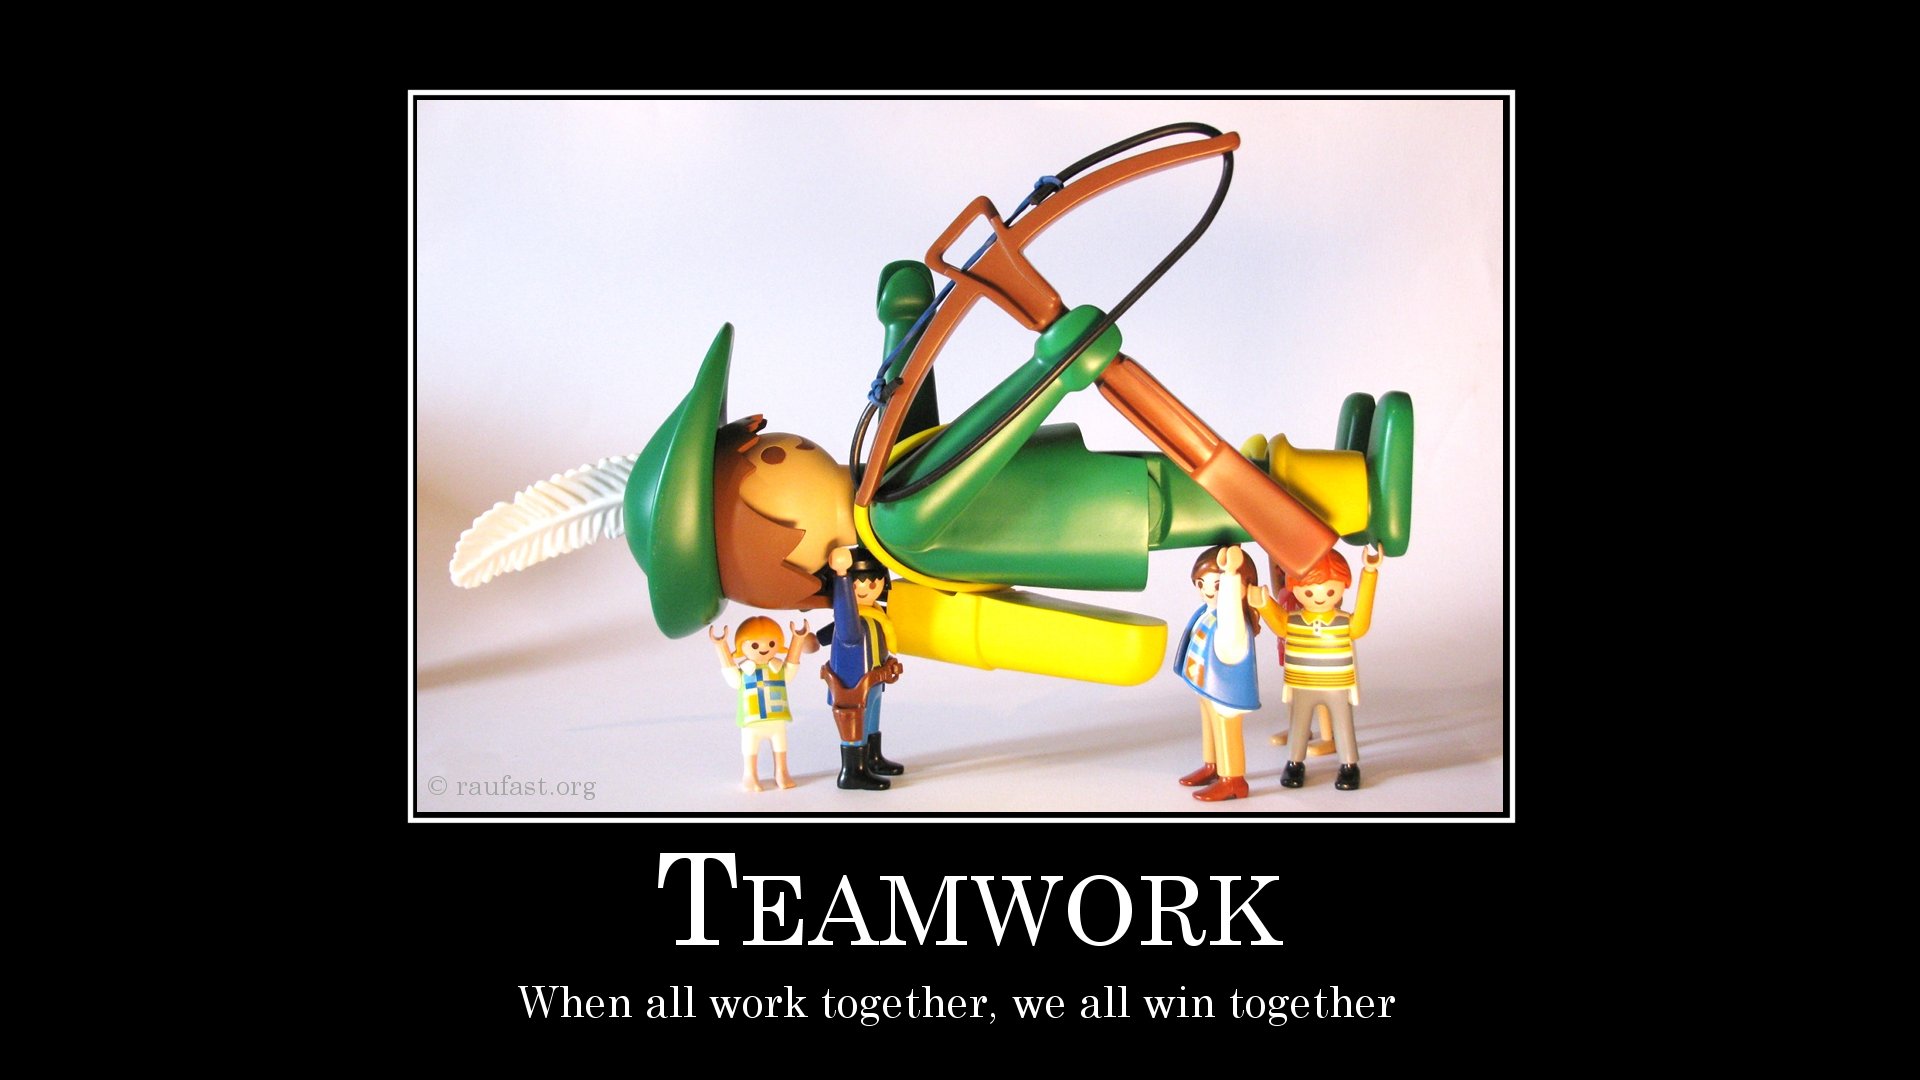 ... teamwork quotes funny teamwork quotes for work teamwork quotes for